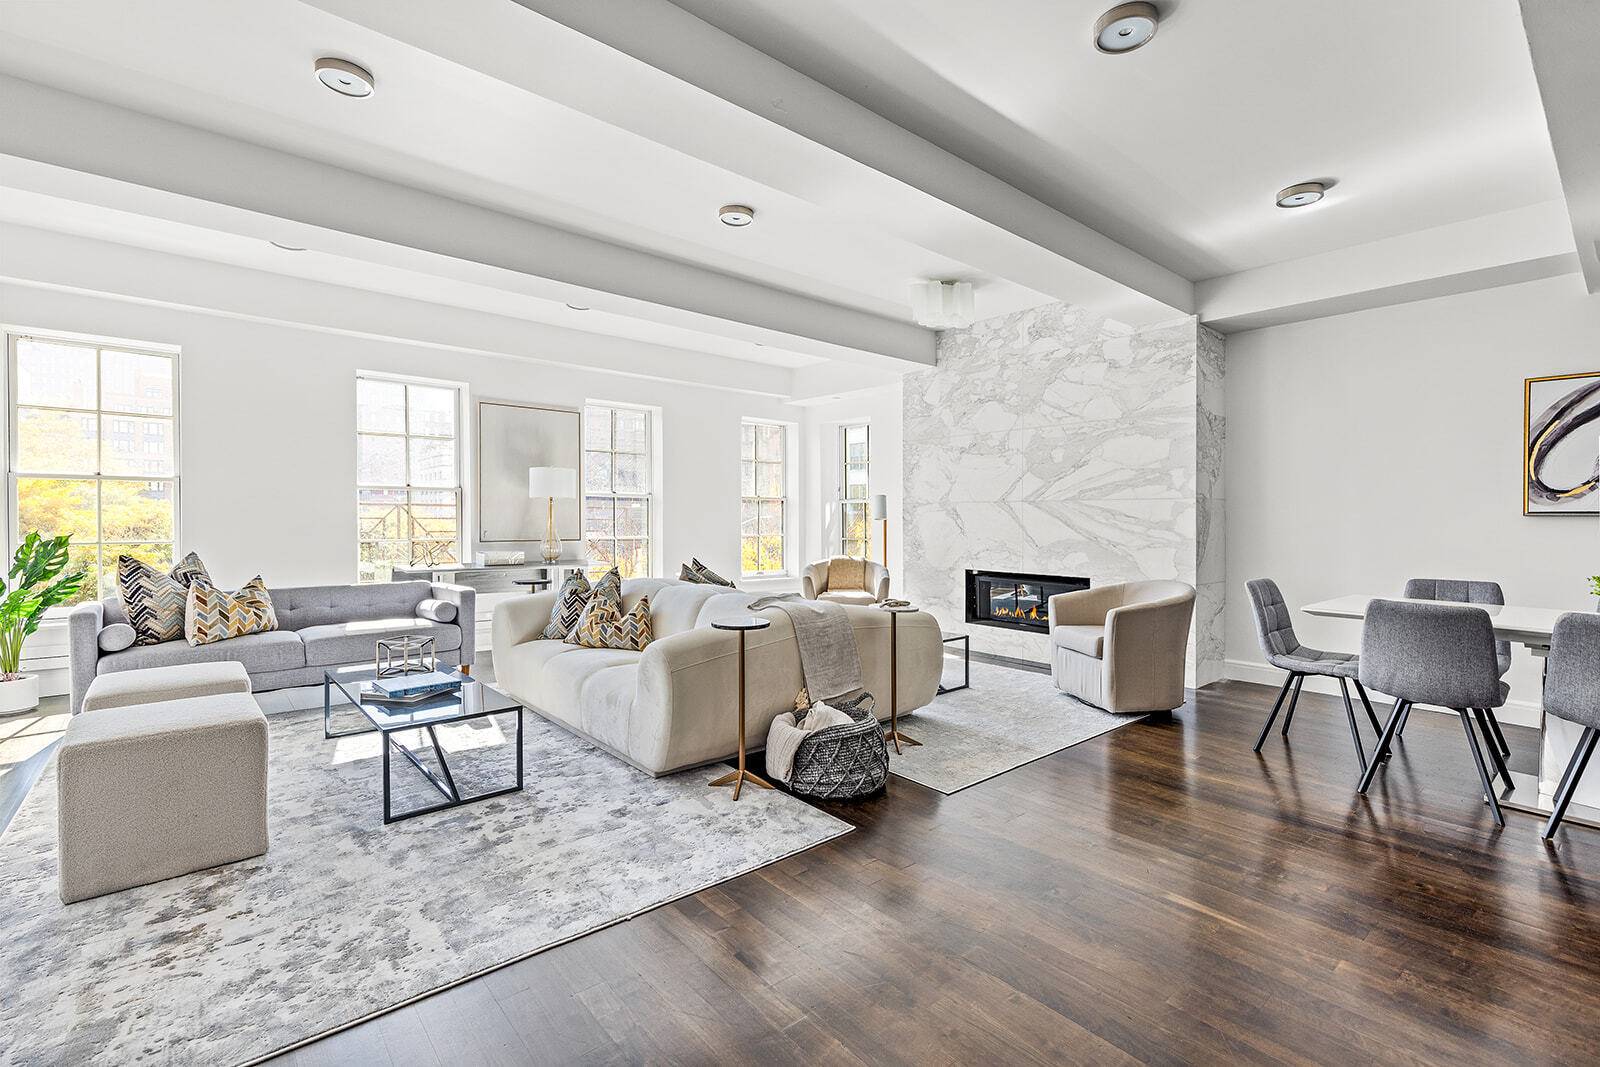 Introducing the Maisonette at Laight House Tribeca Nestled on the corner of prime Laight Street in Tribeca's Historic District, this airy 5 bedroom, 4.